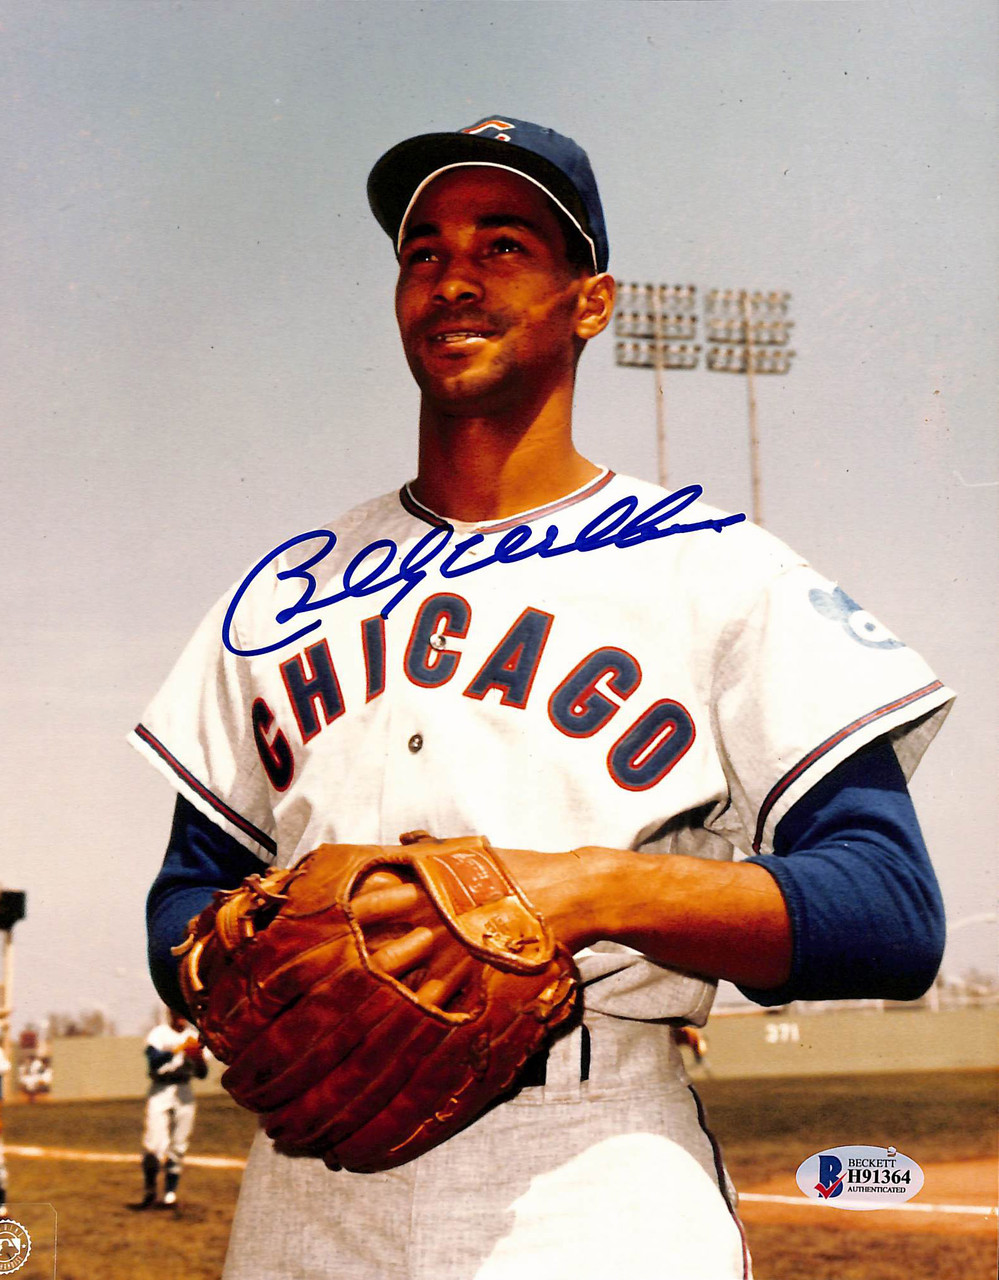 Cubs Billy Williams Authentic Signed 8x10 Photo Autographed BAS 3